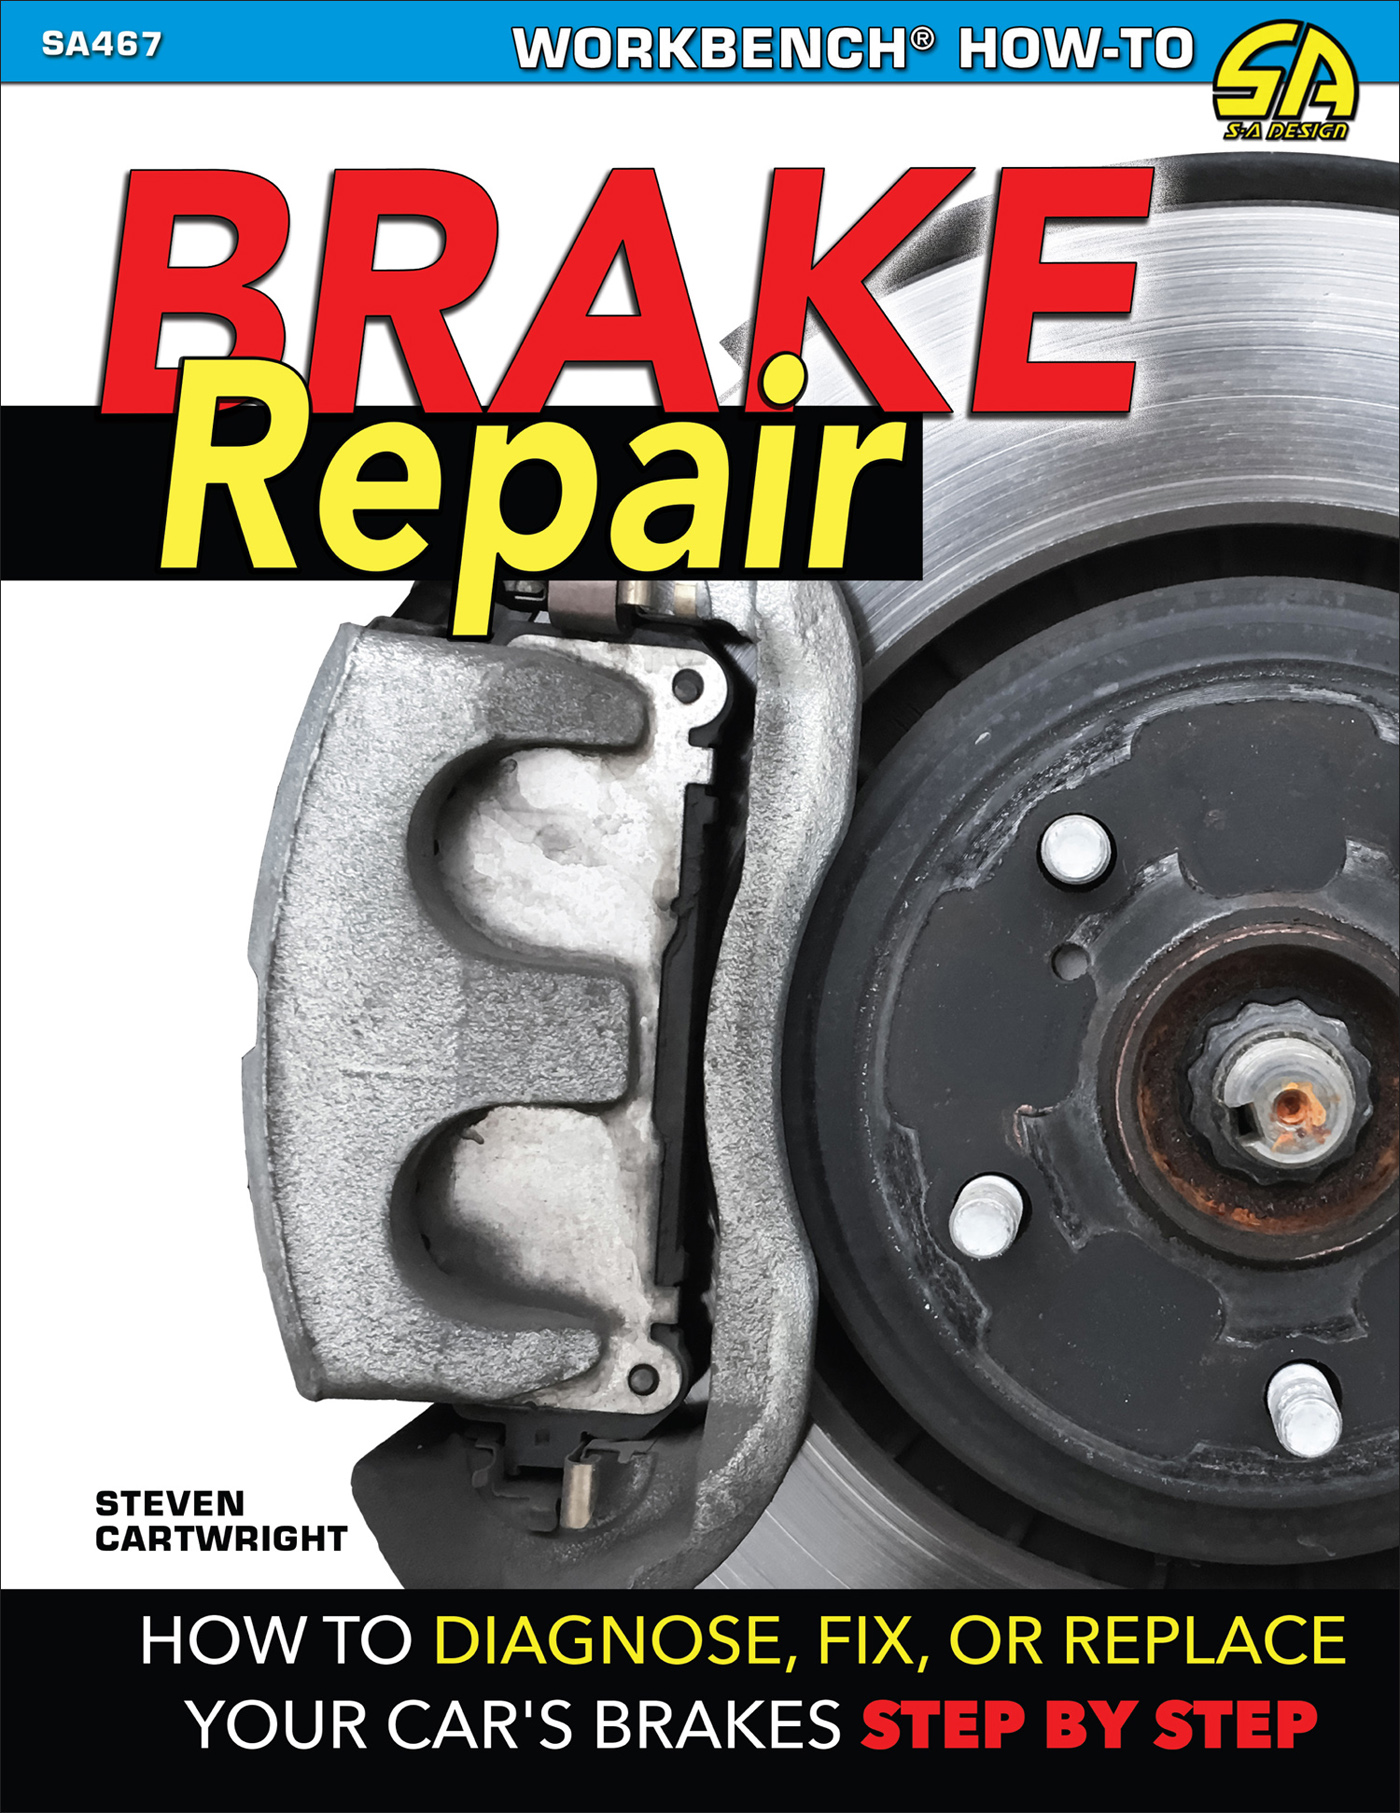 Brake Repair How to Diagnose Fix or Replace Your Cars Brakes Step-By-Step - image 1